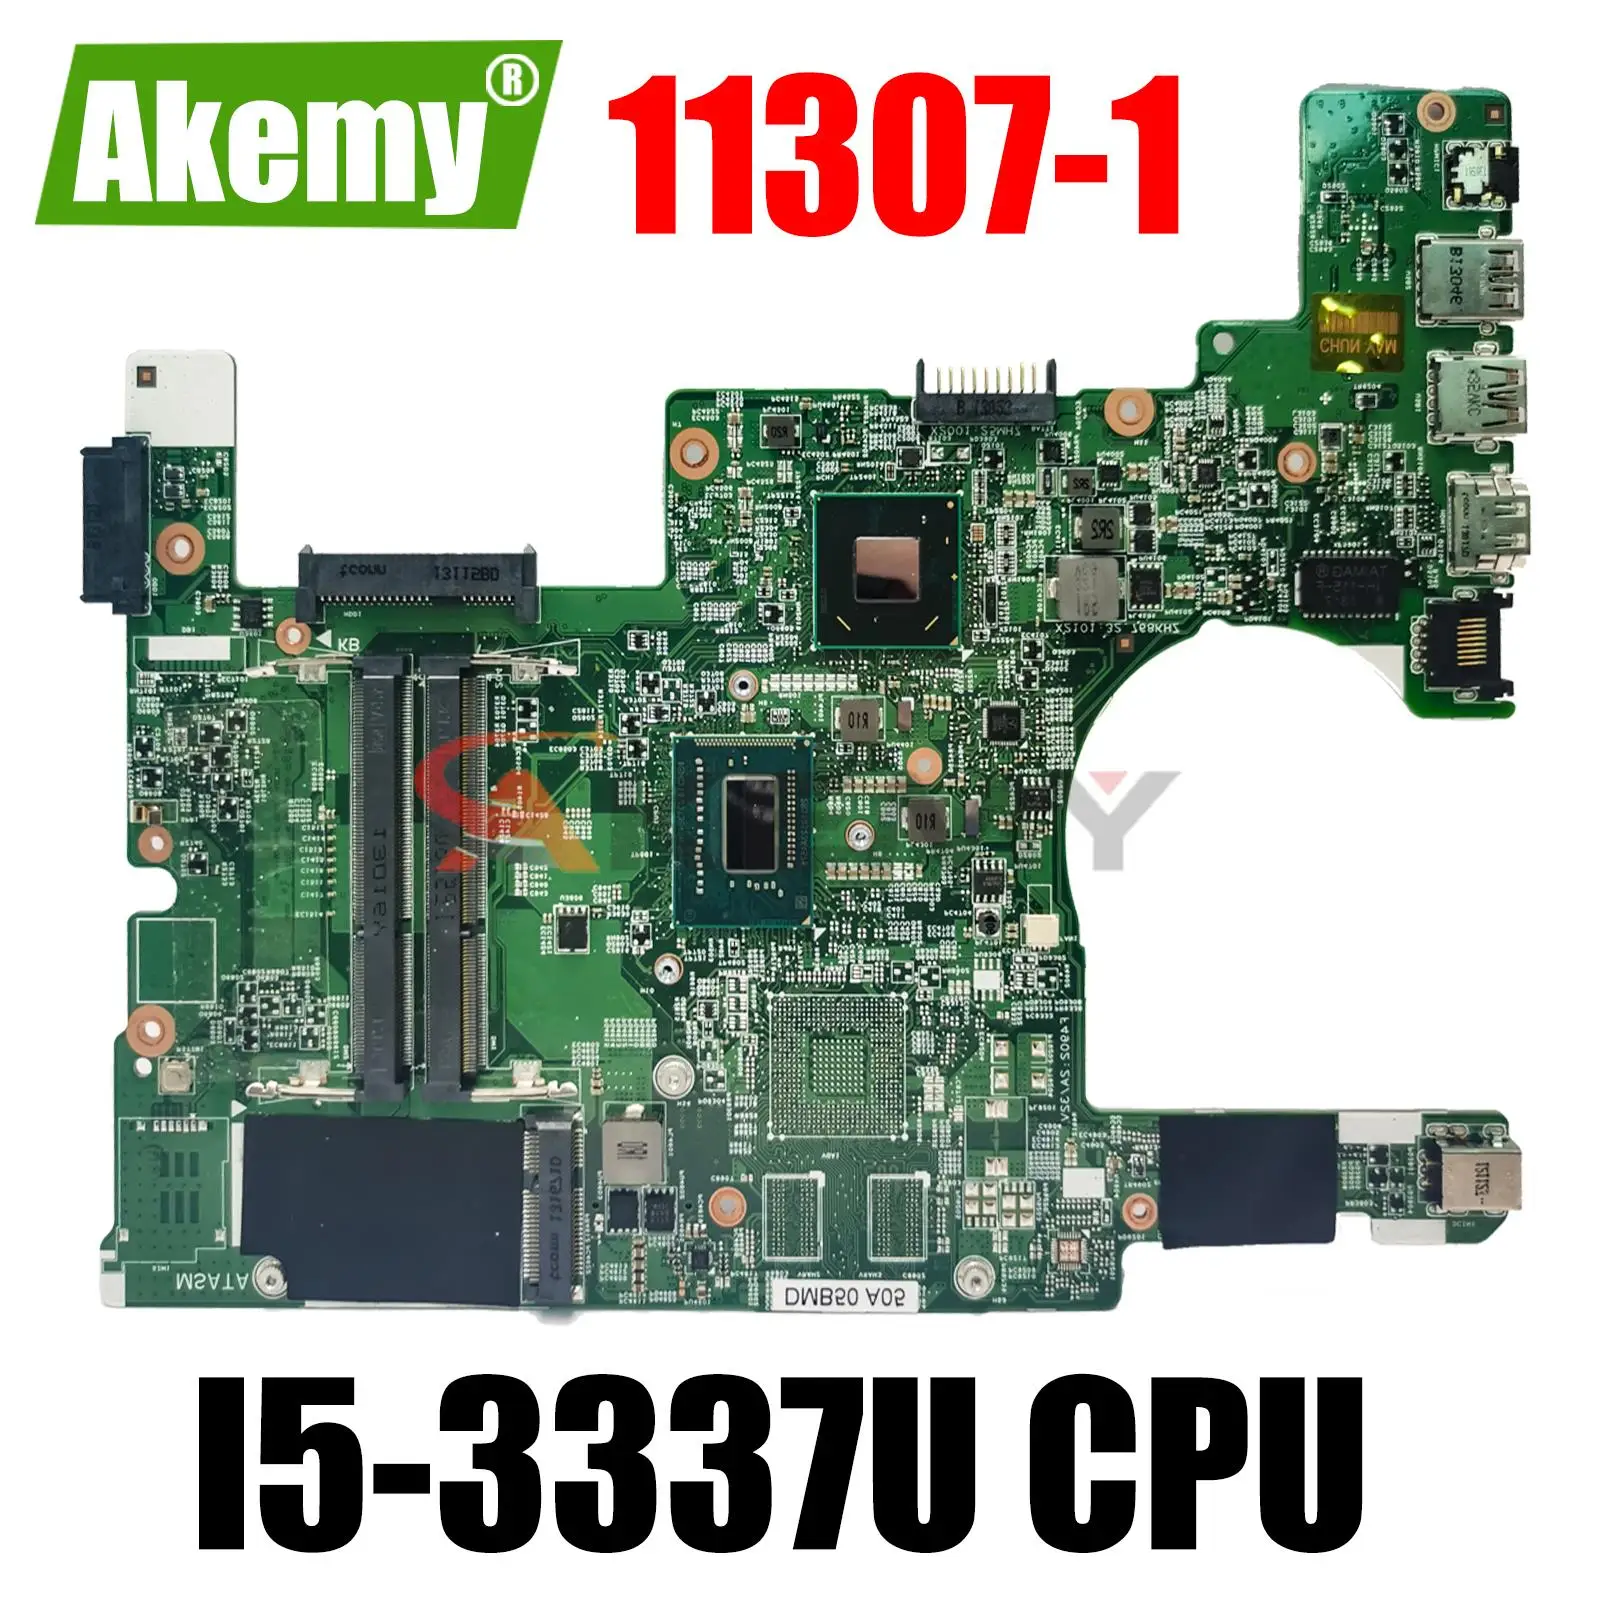 

For DELL Inspiron XPS 15z 5523 Laptop Motherboard With I5-3337U CPU 11307-1 CN-013Y69 013Y69 13Y69 Mainboard 100% tested ok